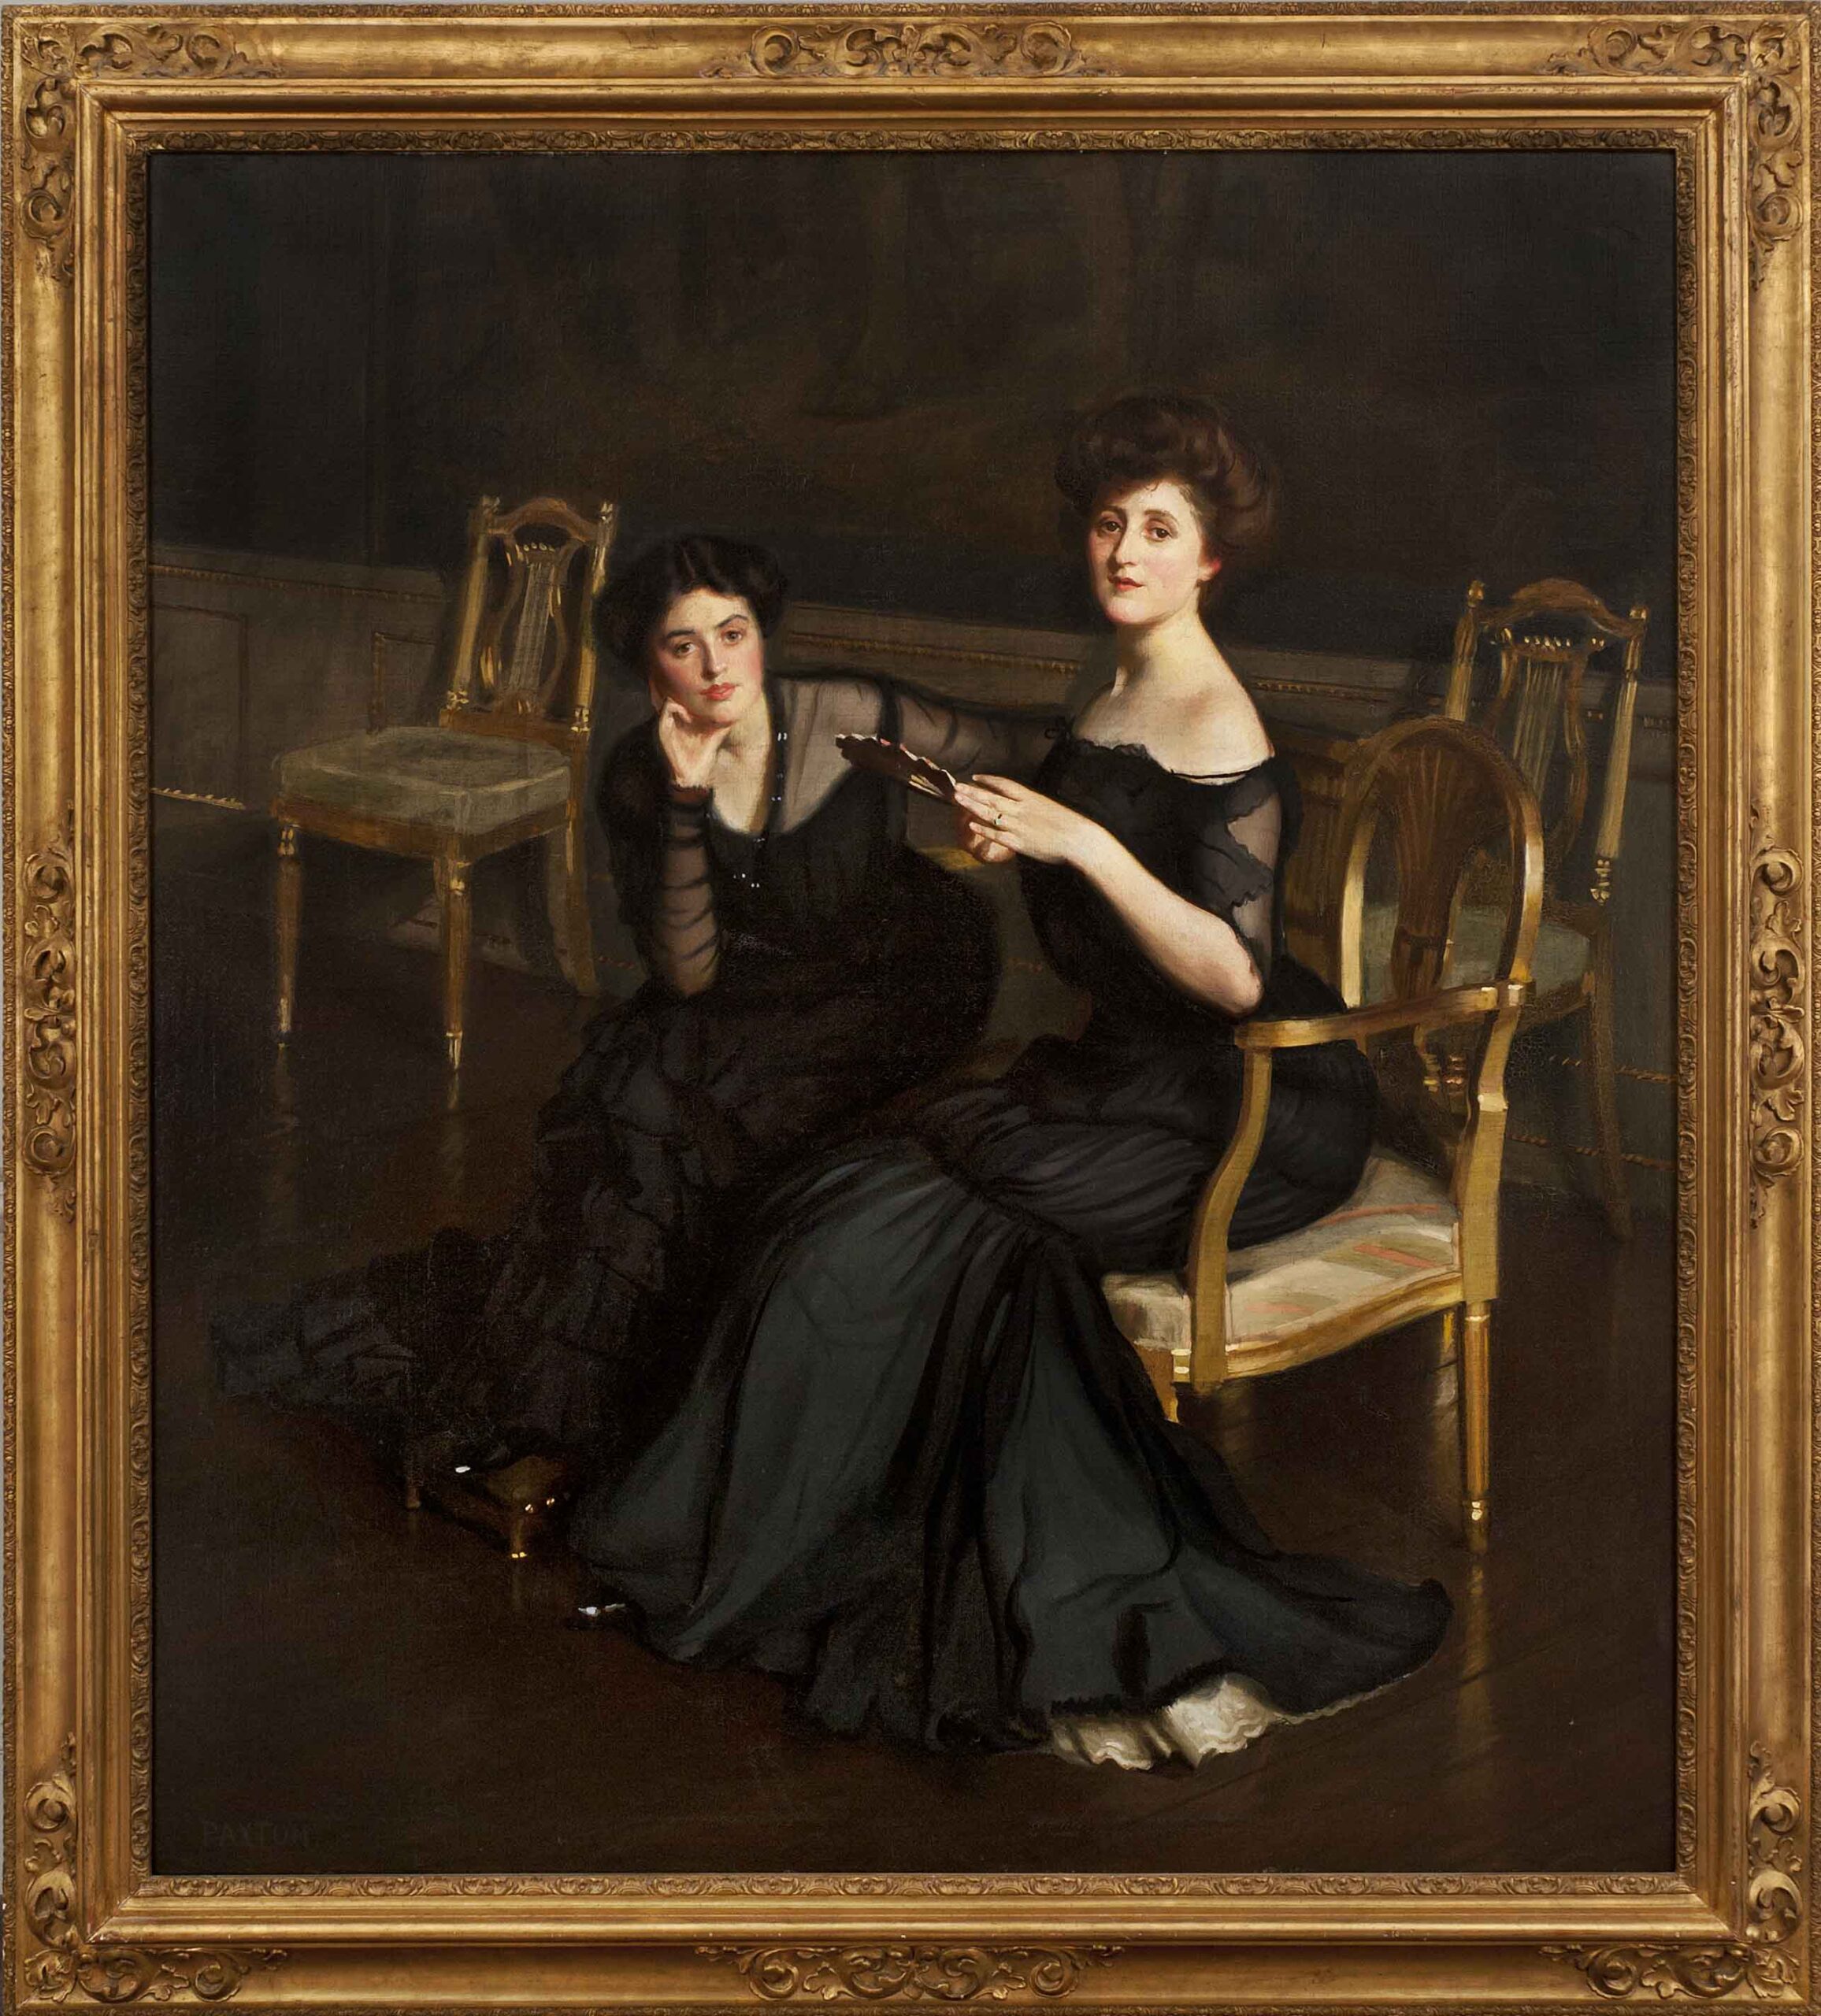 

											On View New York</b>

											<em>
												The Grand Manner</em> 

											<h4>
												Through May 25, 2023											</h4>

		                																																													<i>William McGregor Paxton, The Sisters,</i>  
																																								1904, 
																																								Oil on canvas, 
																																								72 x 64 inches 
																								
		                				